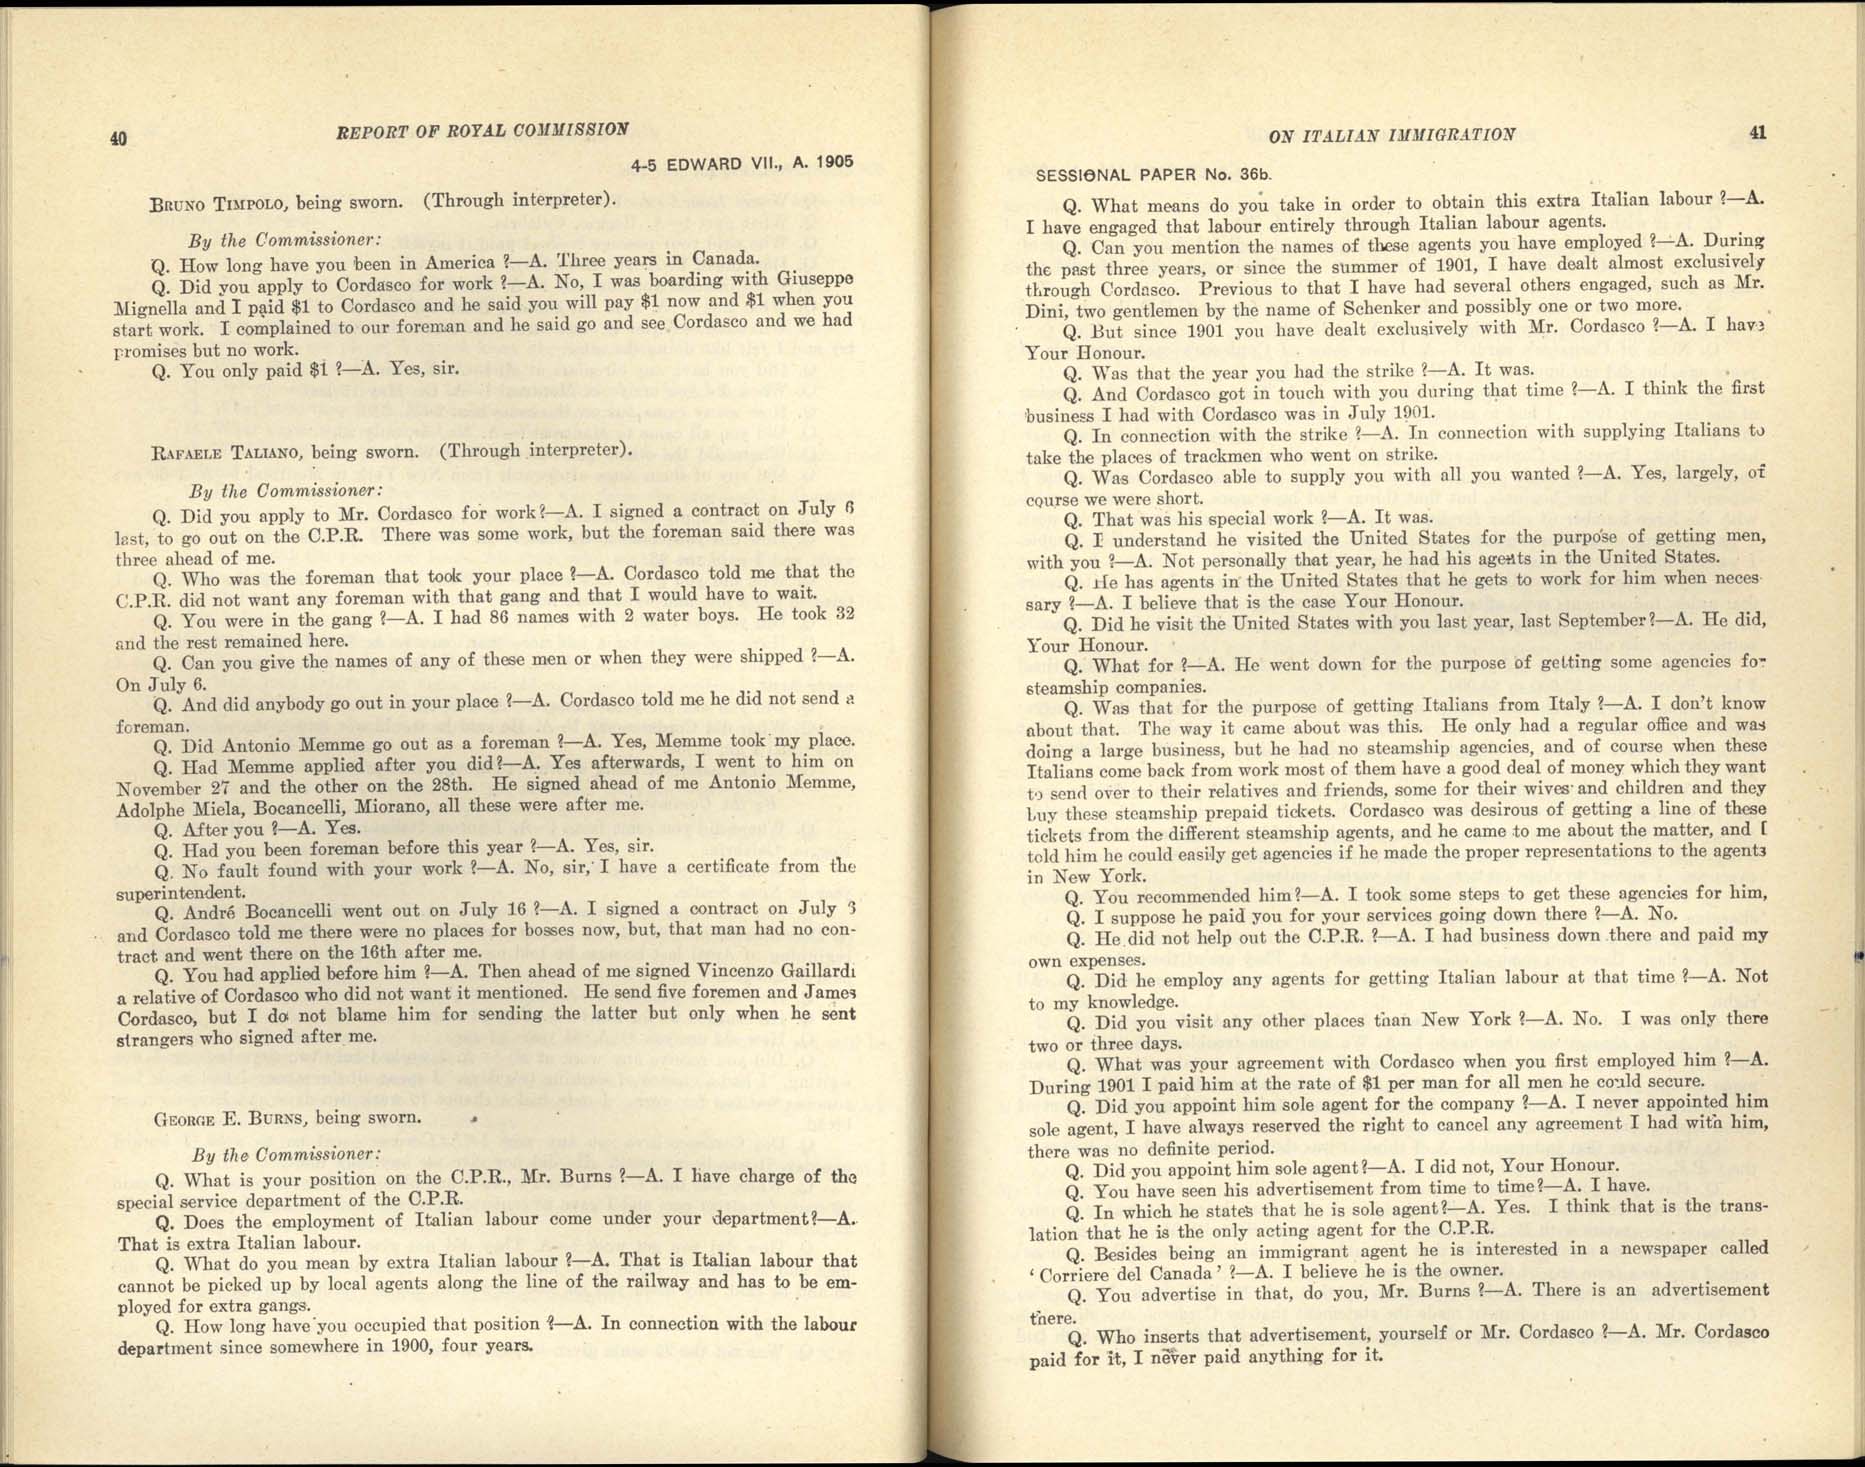 Page 40, 41 Royal Commission on Italian Immigration, 1904-1905